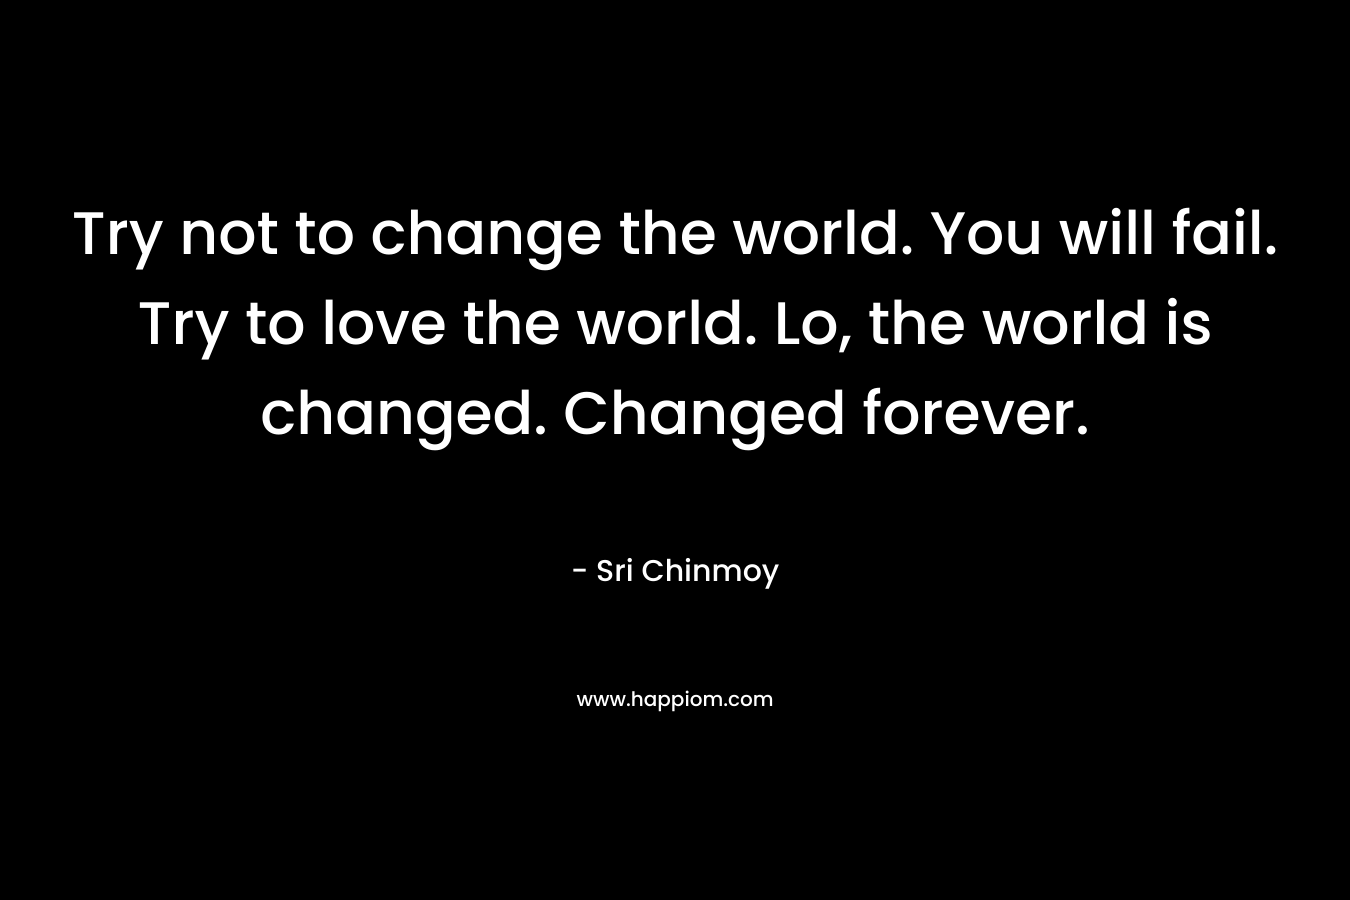 Try not to change the world. You will fail. Try to love the world. Lo, the world is changed. Changed forever. – Sri Chinmoy